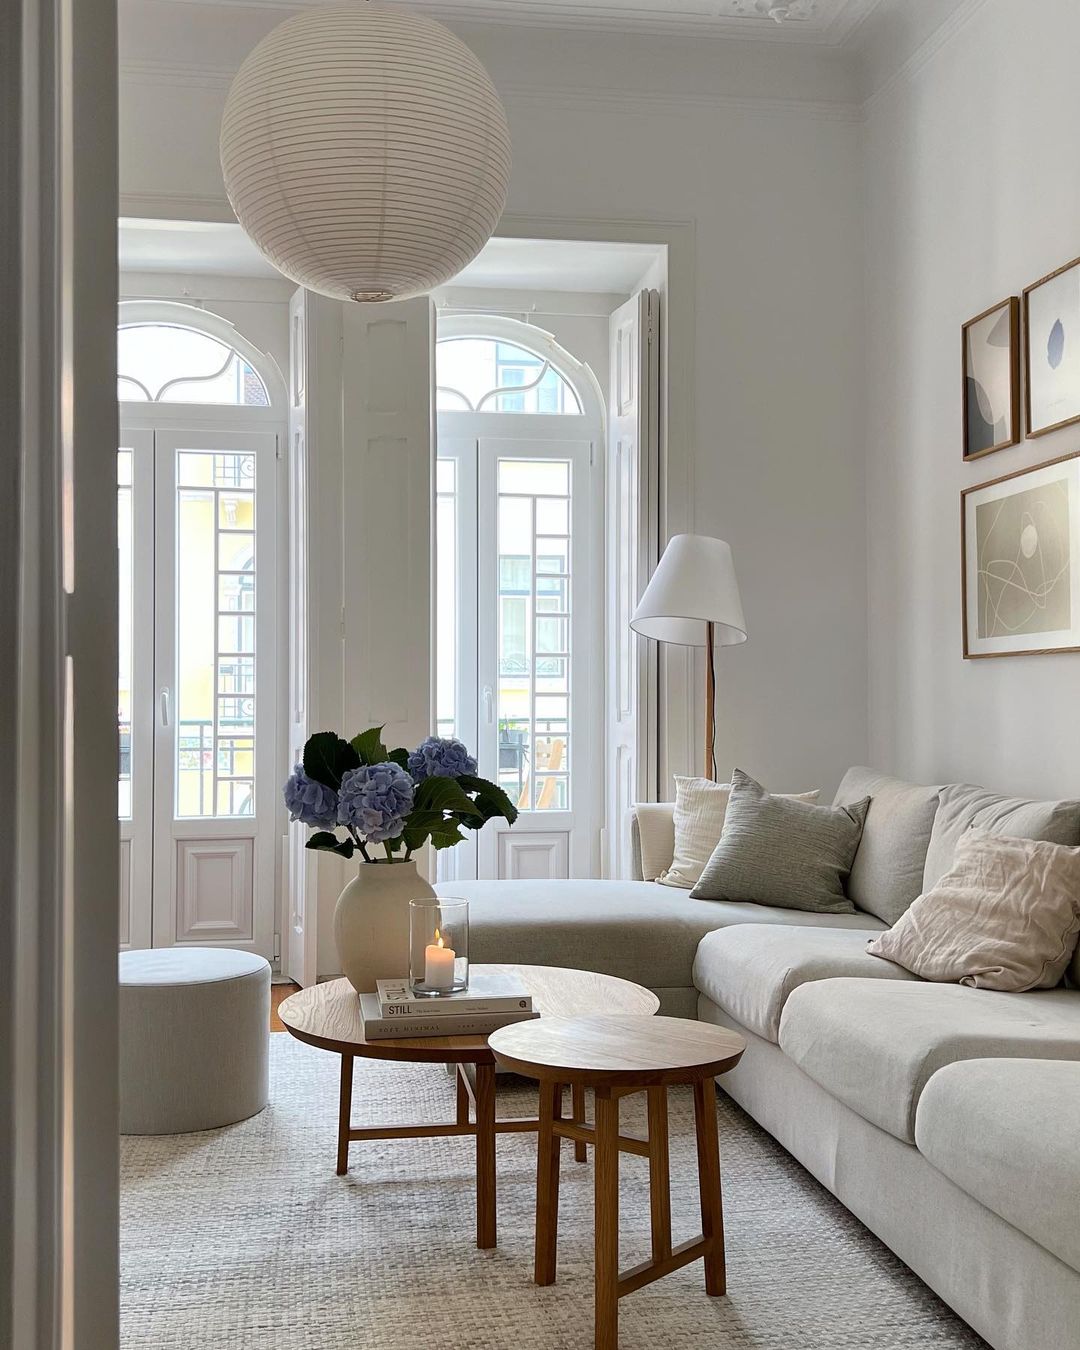 Scandinavian Living Room: Top Tips and Ideas to Craft a Stunning Interior